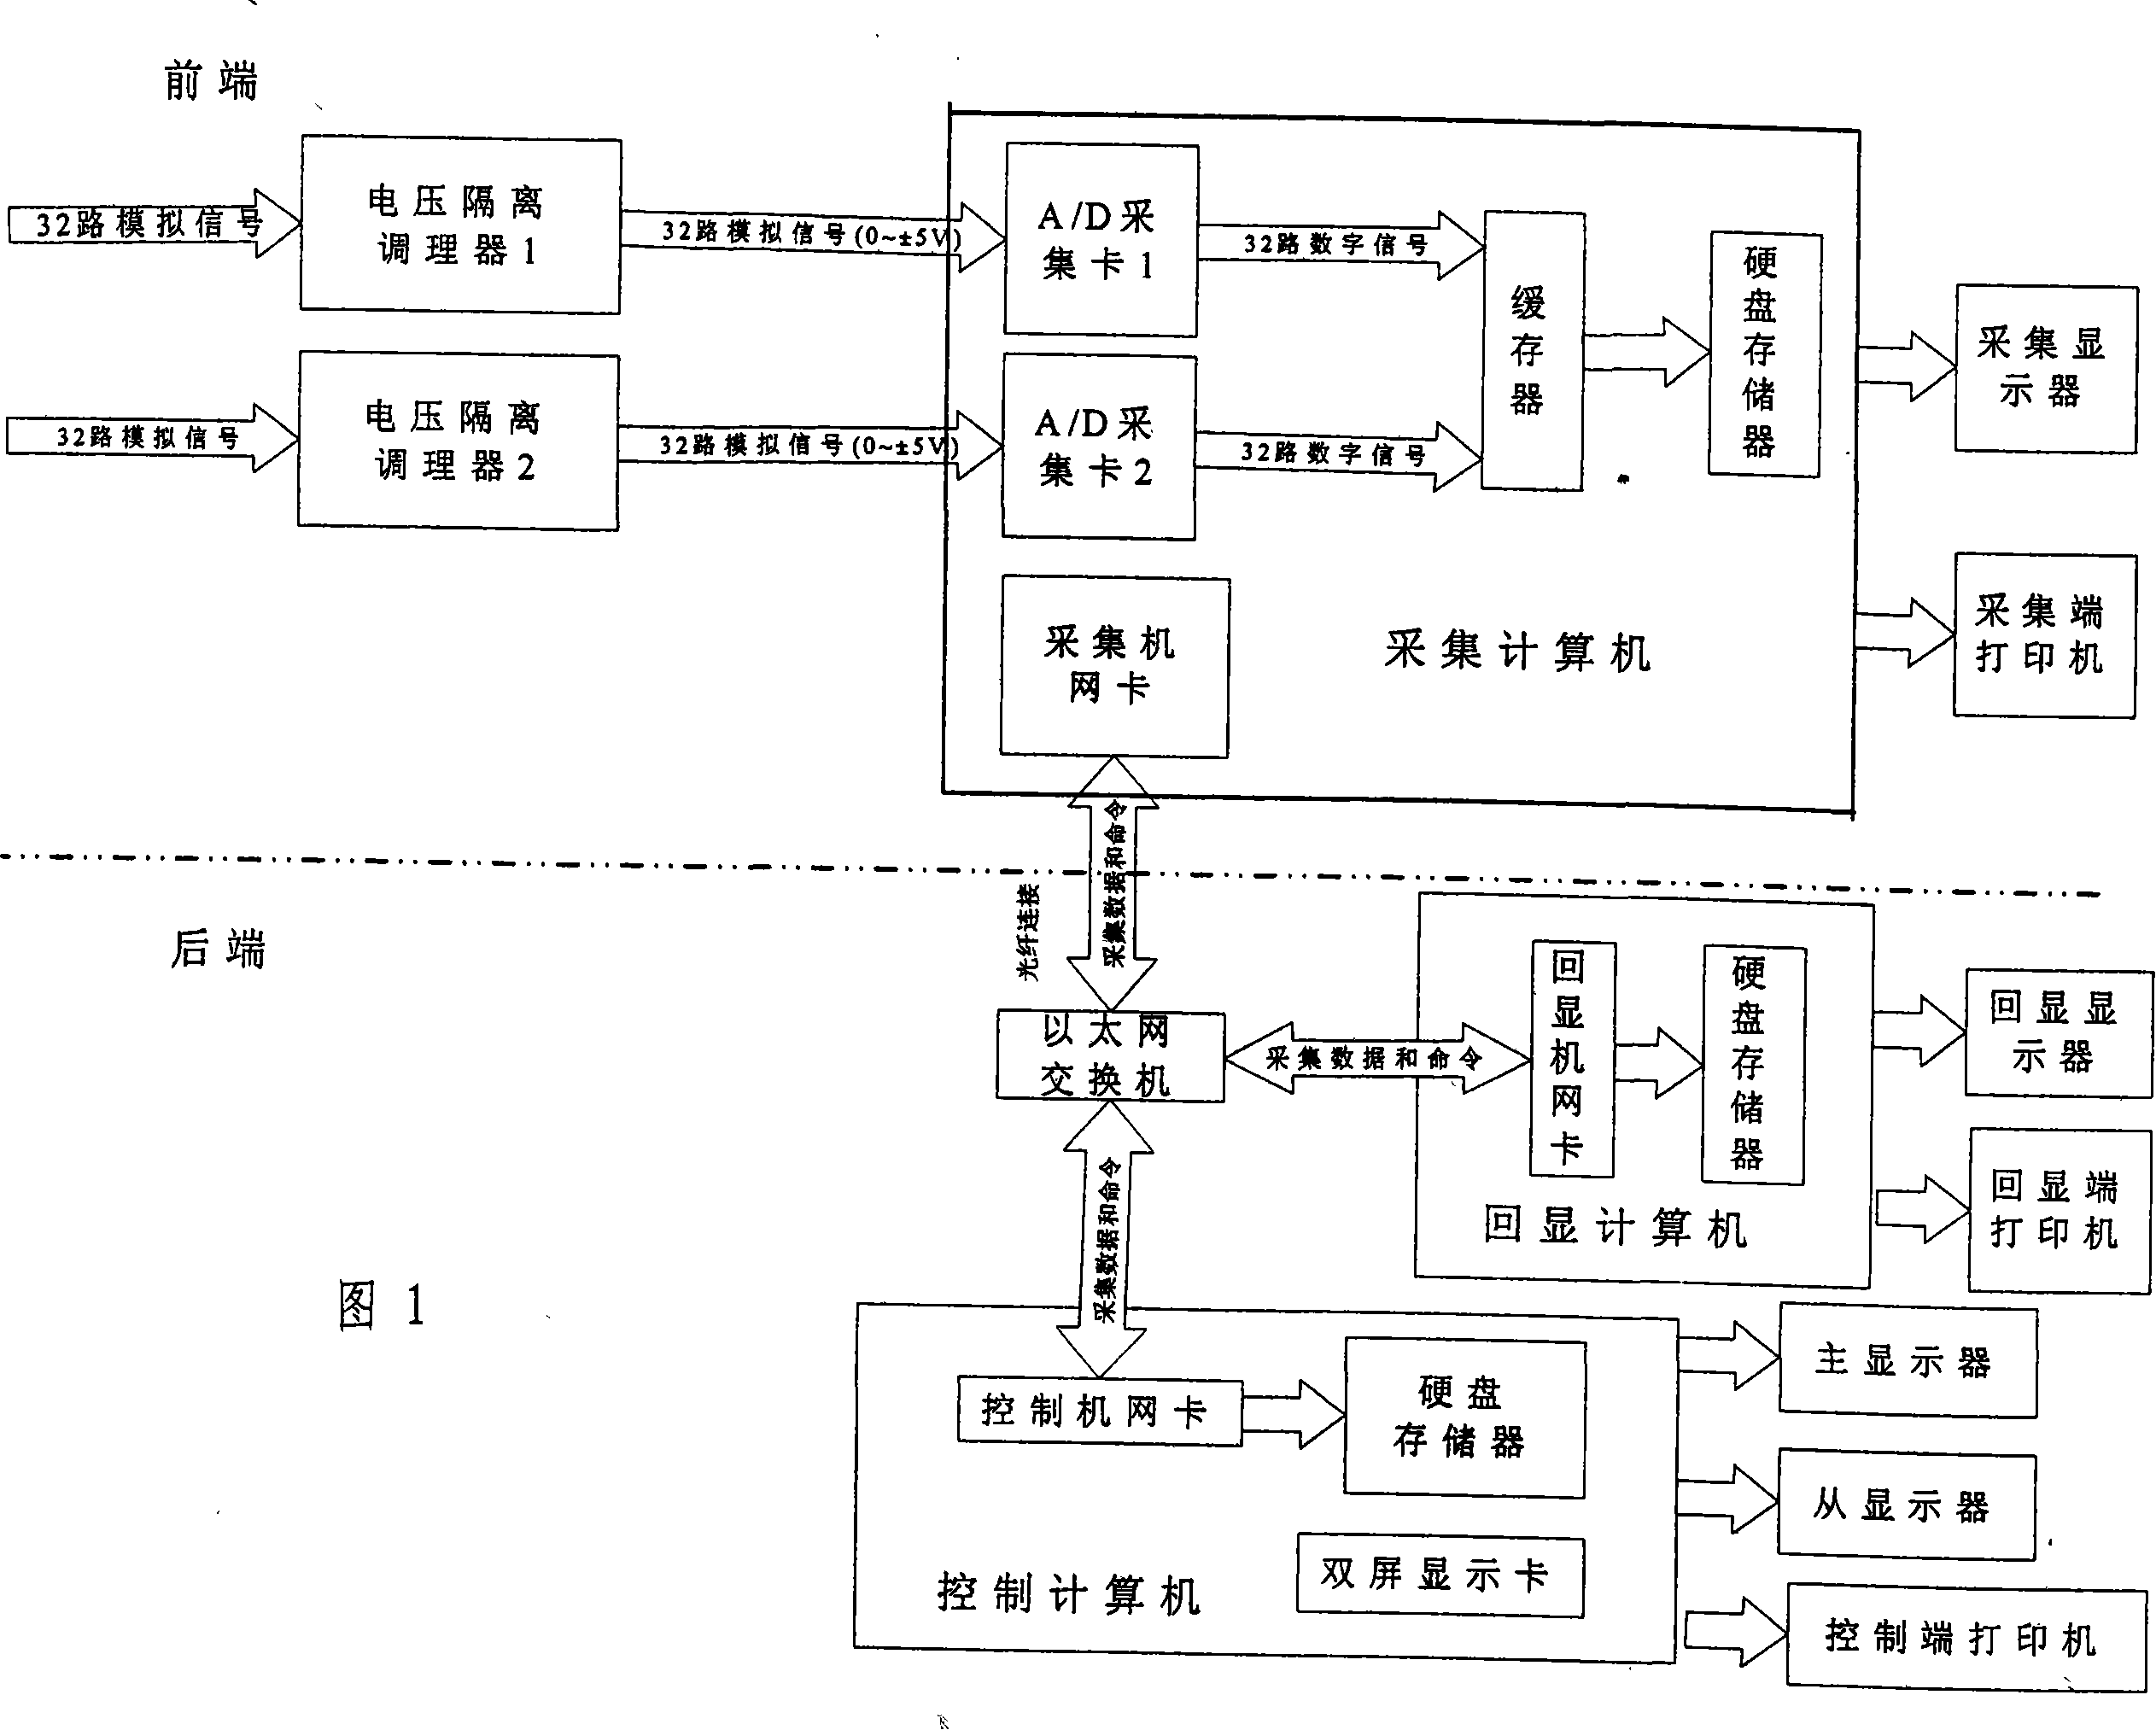 Multichannel data acquisition system and method